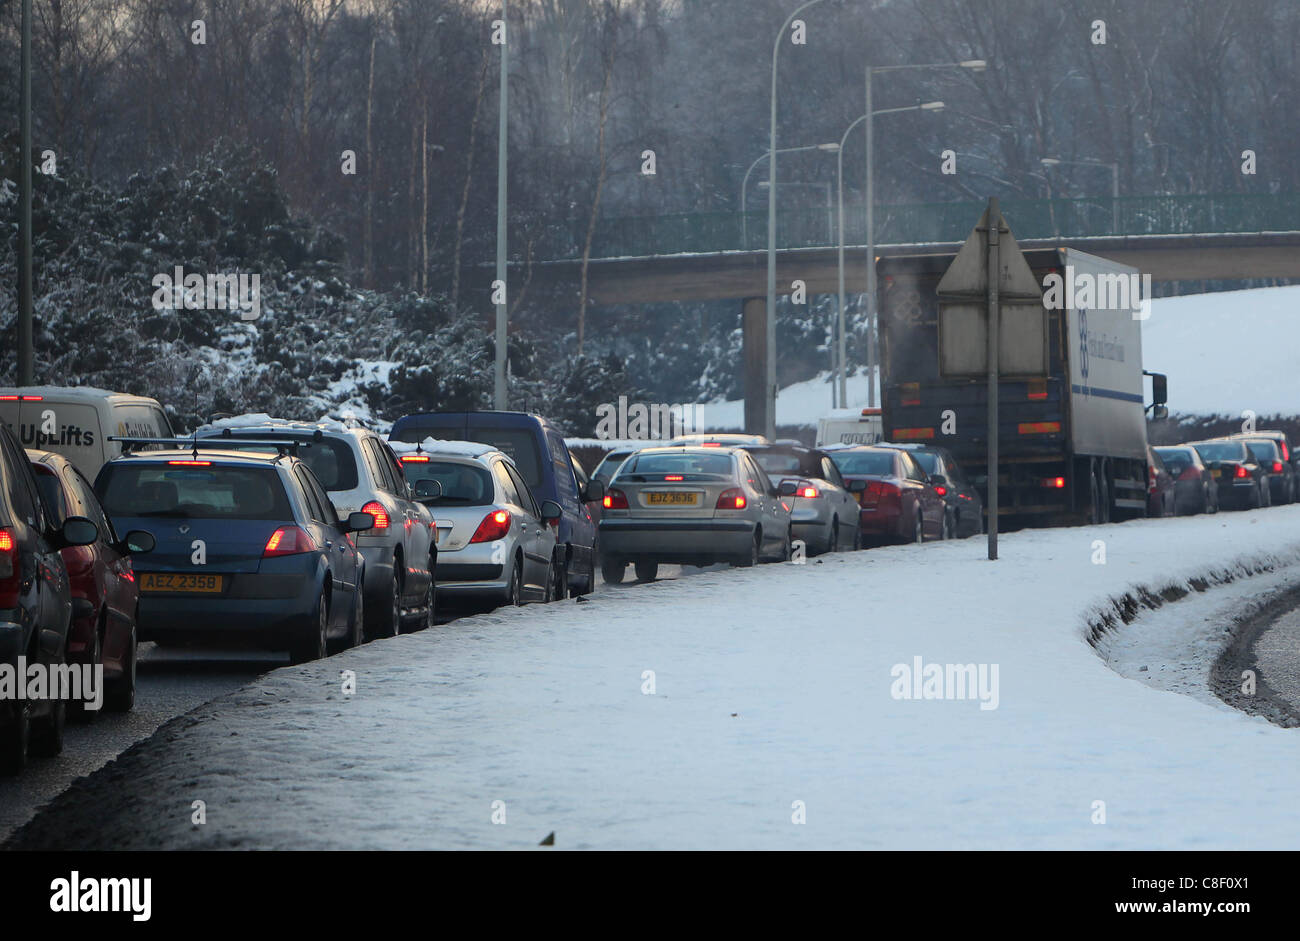 Traffic stopped during a heavy snowfall Stock Photo